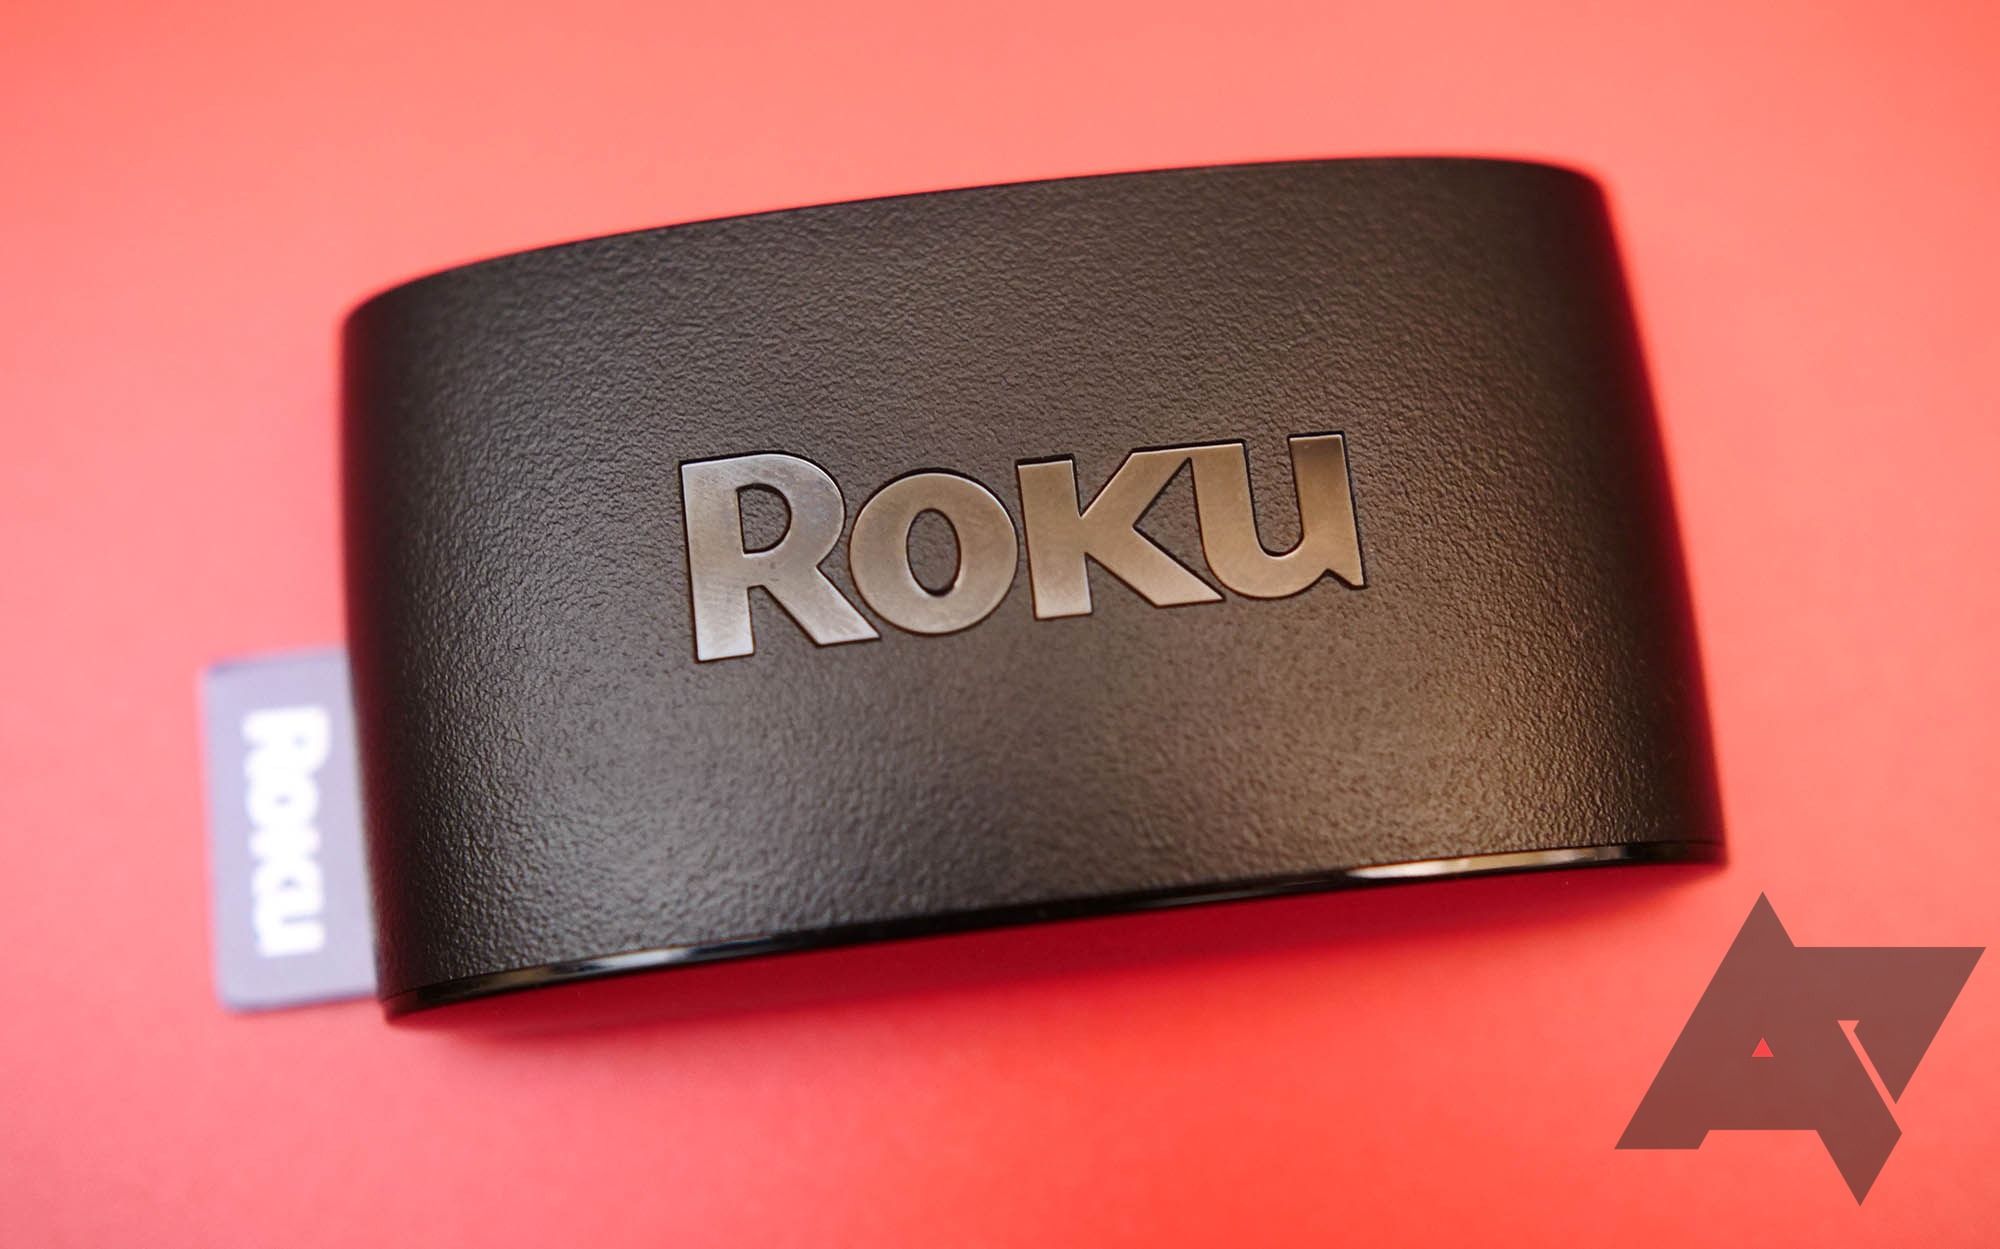 A black Roku device on a red background with the Android Police logo at the bottom right